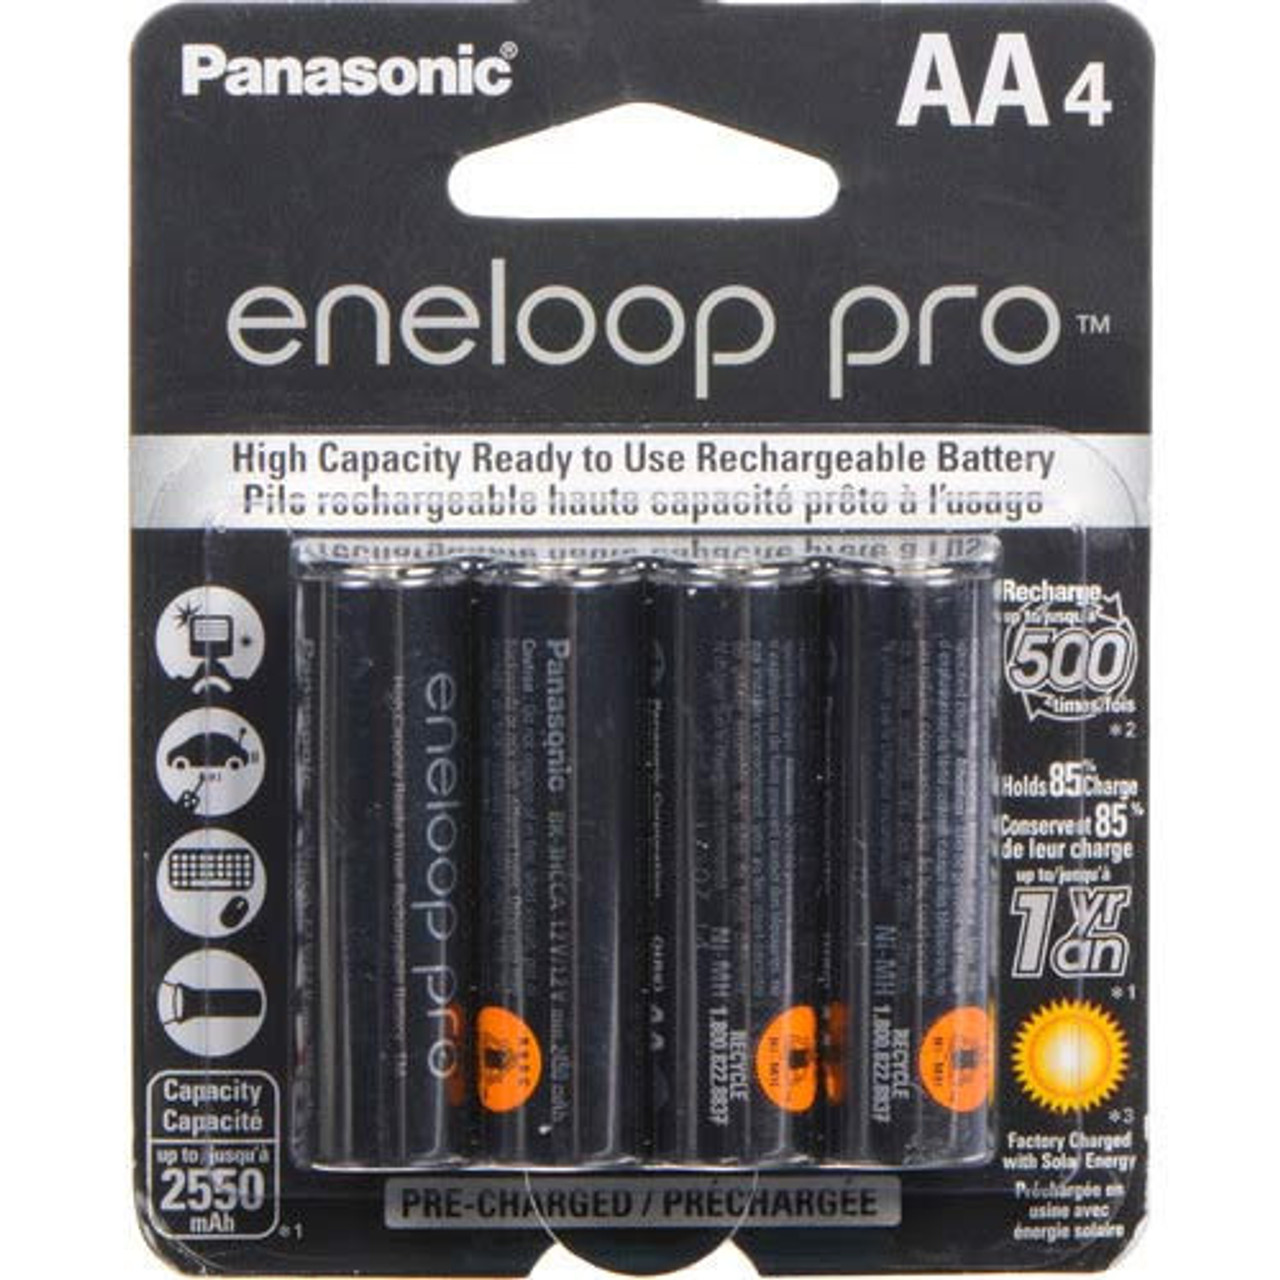 Panasonic Eneloop Rechargeable Batteries Are the Best